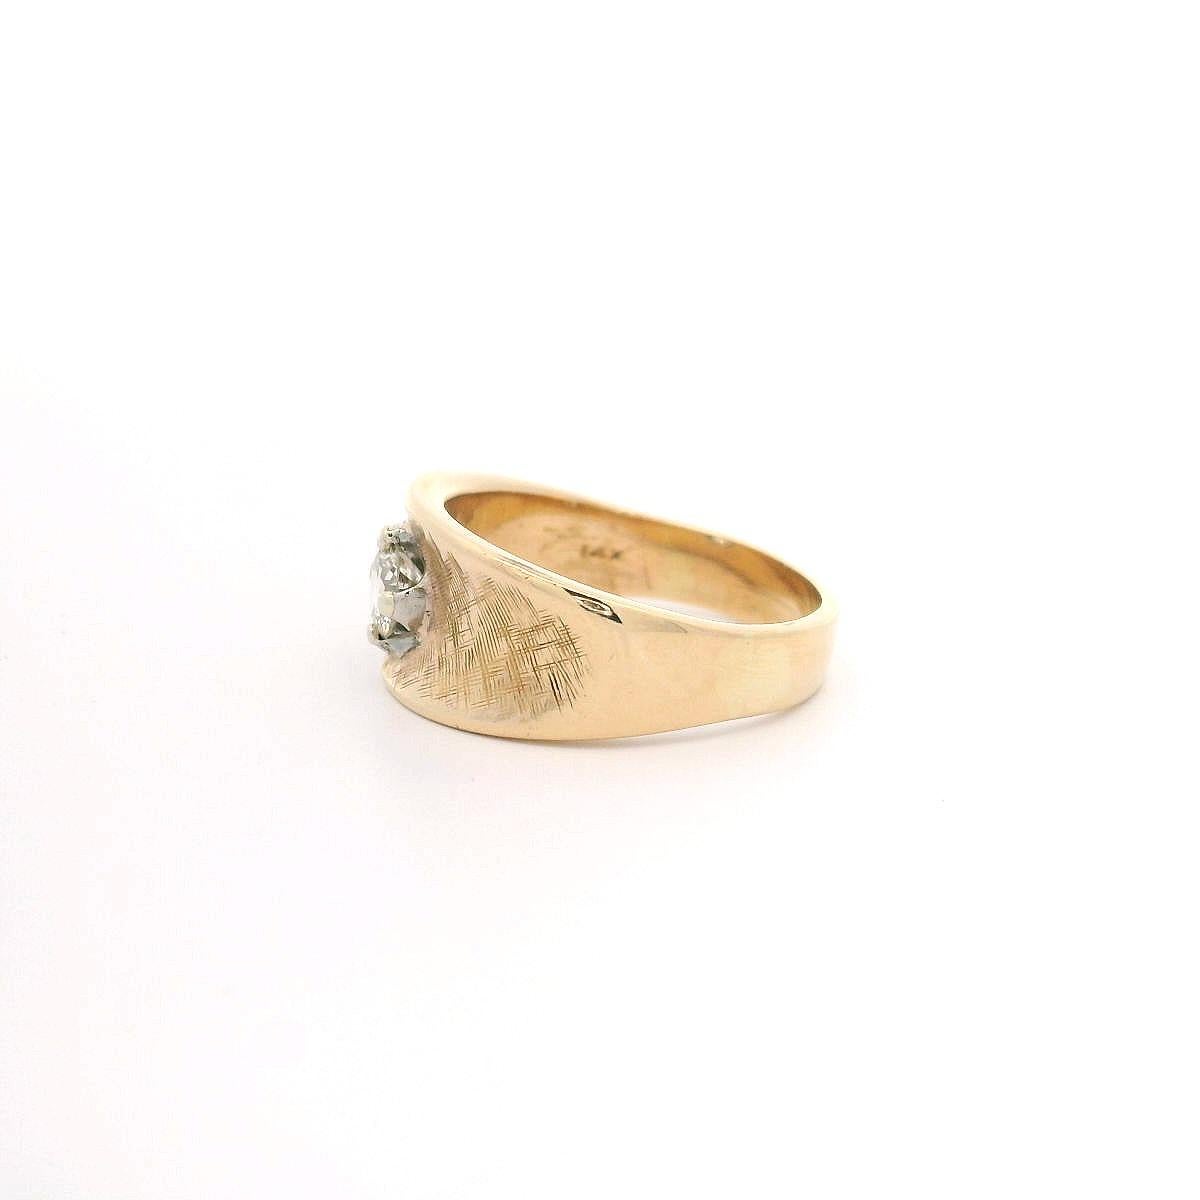 --Stone(s):--
(1) Natural Genuine Diamond - Round Brilliant Cut - Prong Set - H/I Color - VVS2/VS1 Clarity - 0.33mm (approx.)

Material: Solid 14k Yellow Gold
Weight: 5.5 Grams
Ring Size: 6.5 (Fitted on a finger, please contact us prior to purchase